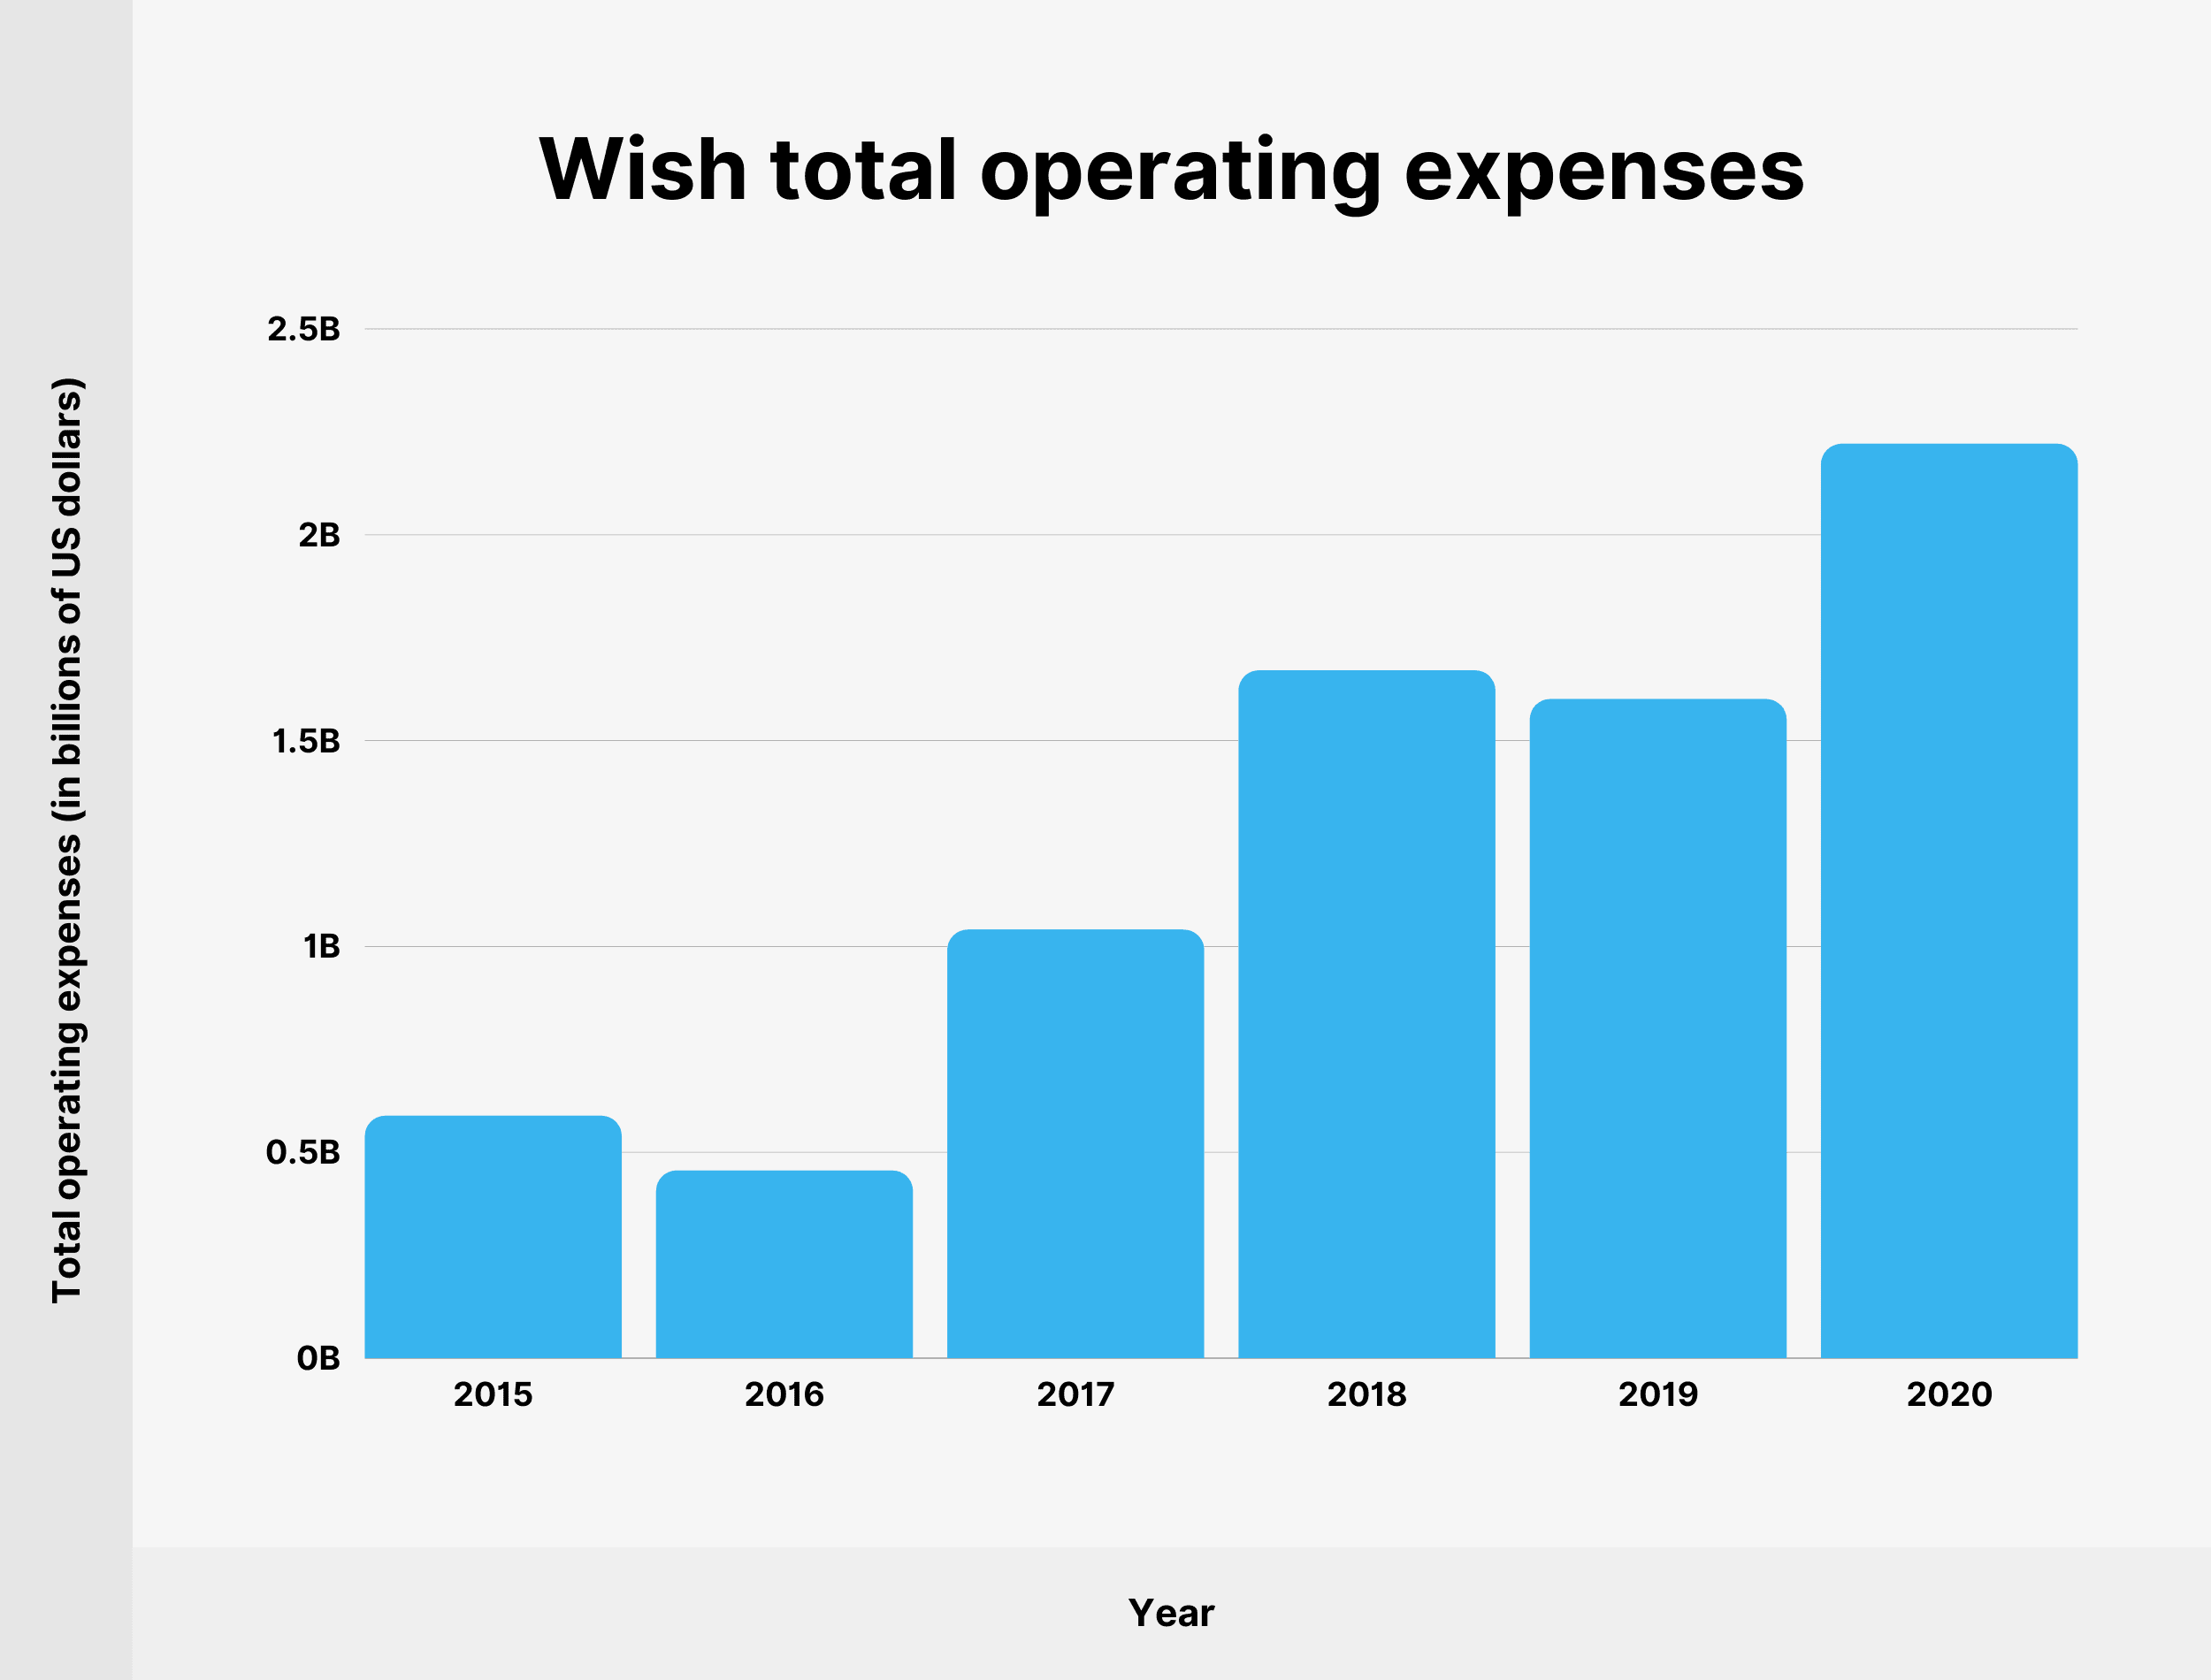 Wish total operating expenses